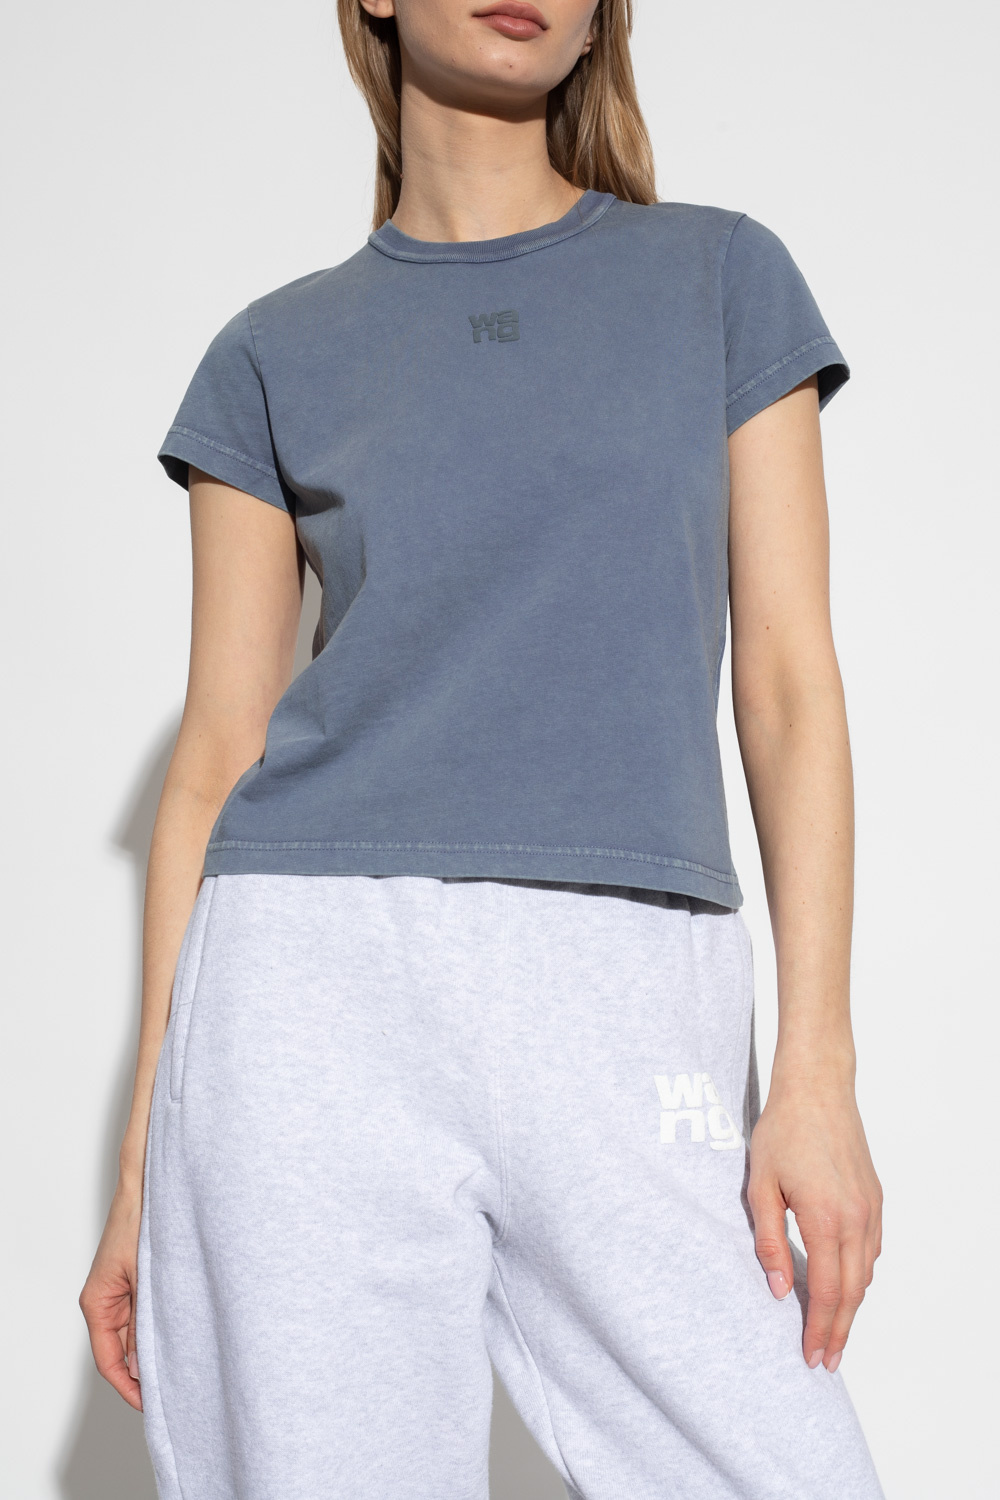 shirt with logo T by Alexander Wang - Crow Neck Long Sleeve